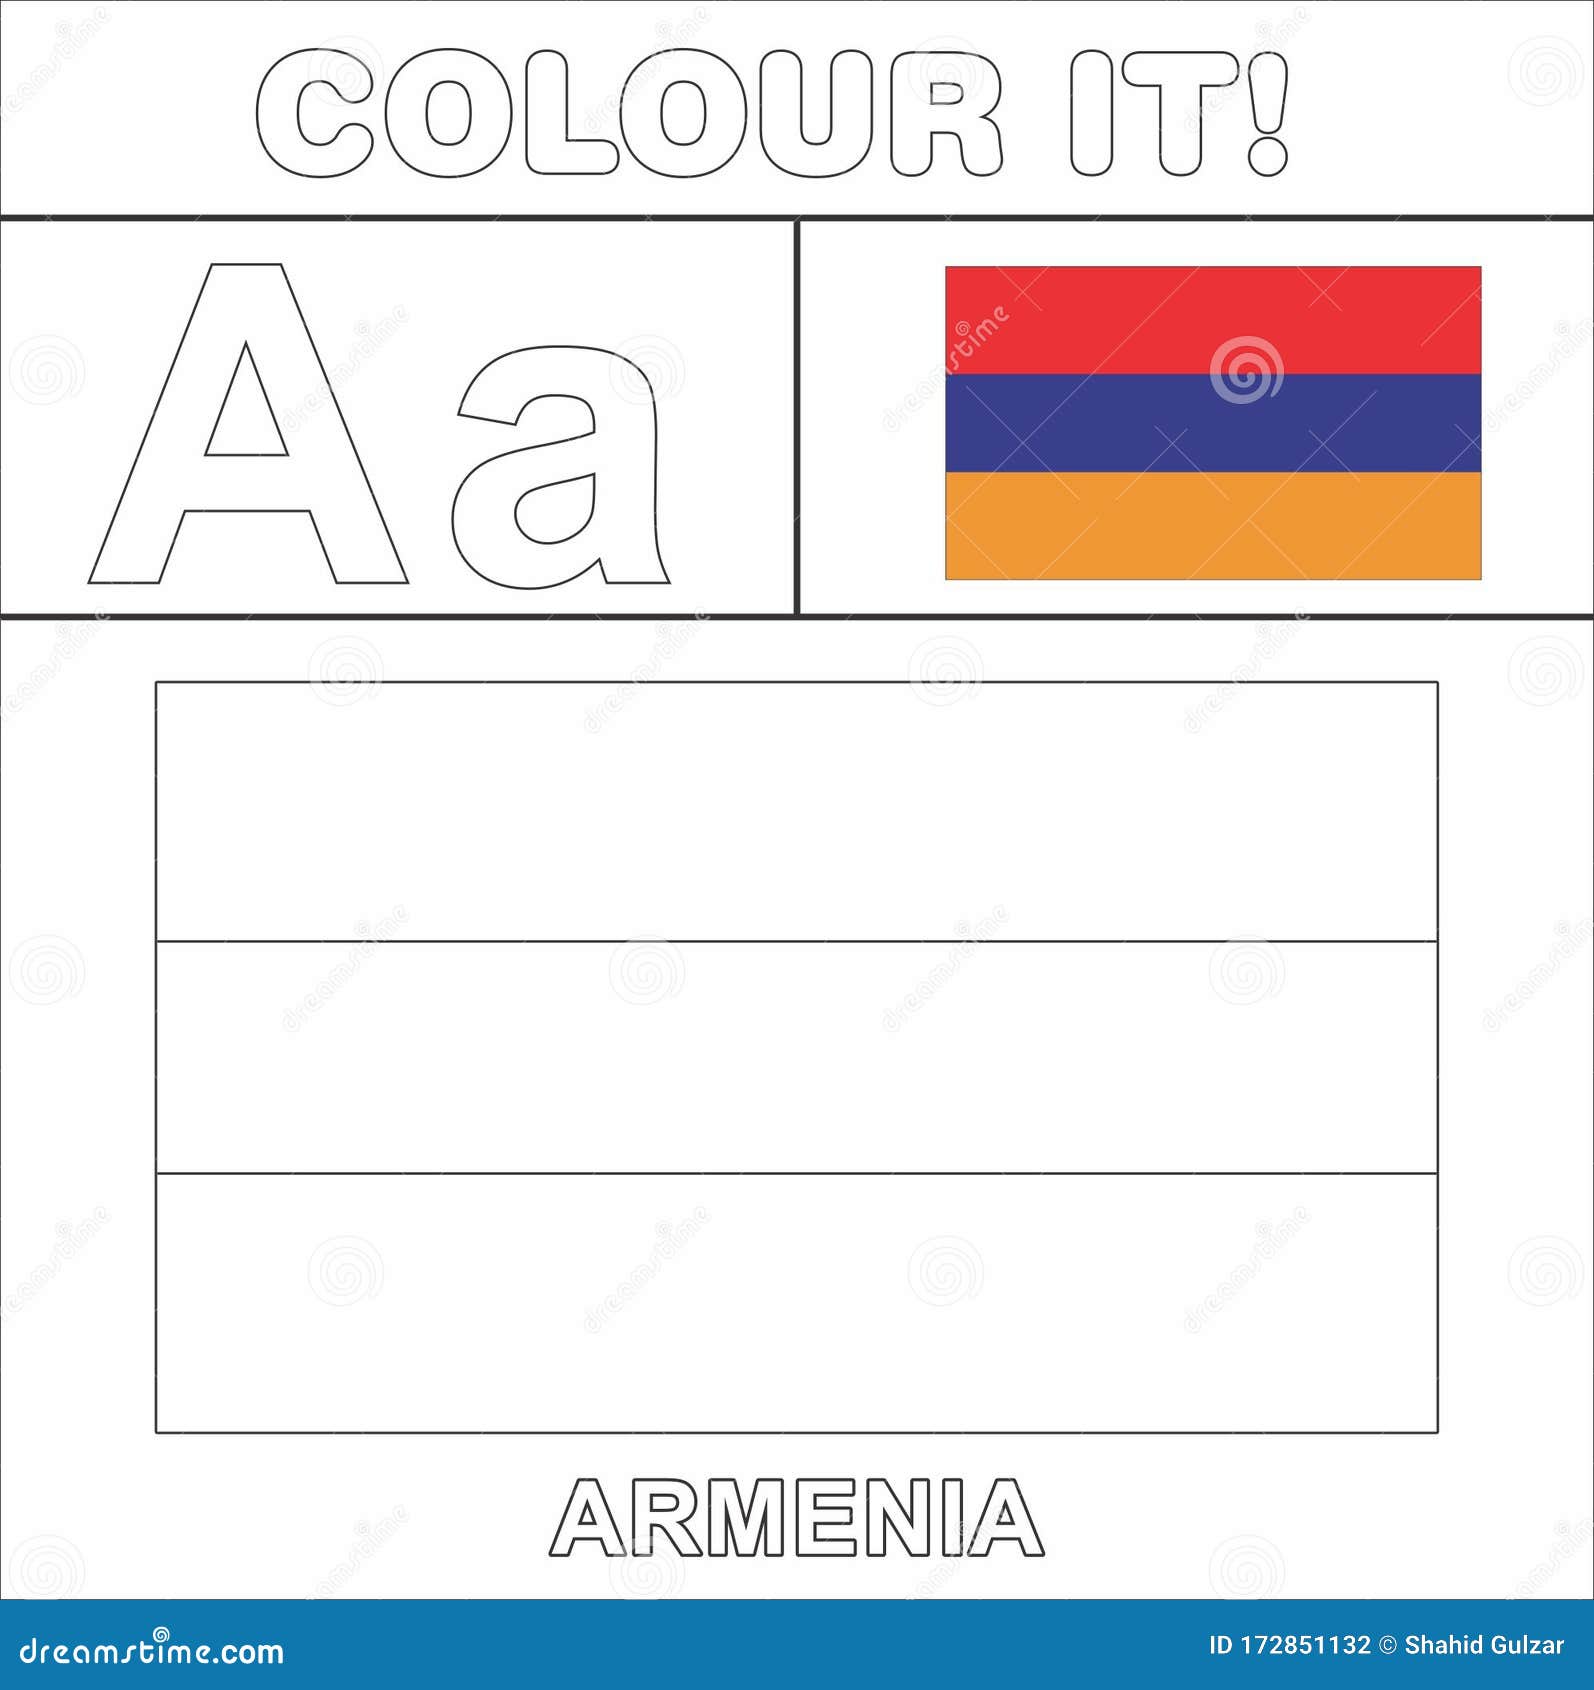 https://thumbs.dreamstime.com/z/colour-vector-kids-stuff-coloring-page-country-start-english-latter-armenia-flag-illustration-line-drawing-poster-172851132.jpg